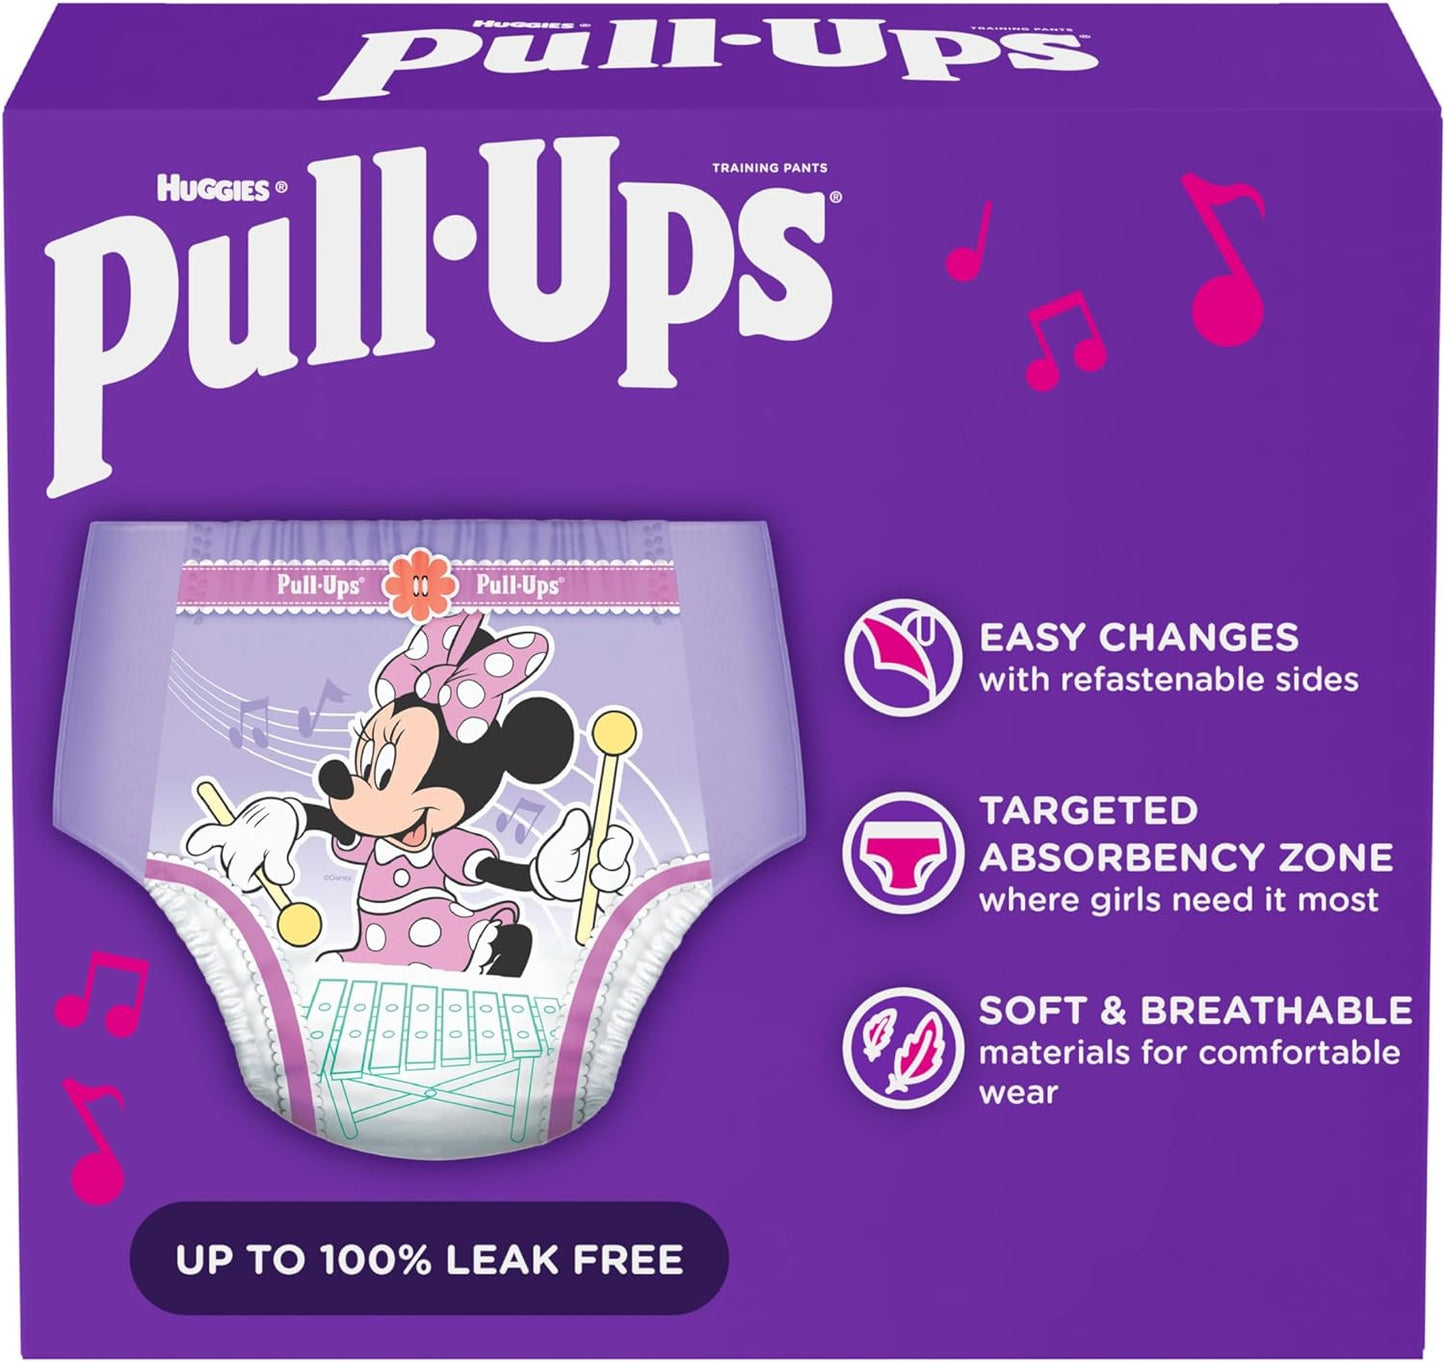 Pull-Ups Girls' Potty Training Pants, 2T-3T (16-34 lbs), 124 Count (4 packs of 31), Packaging May Vary